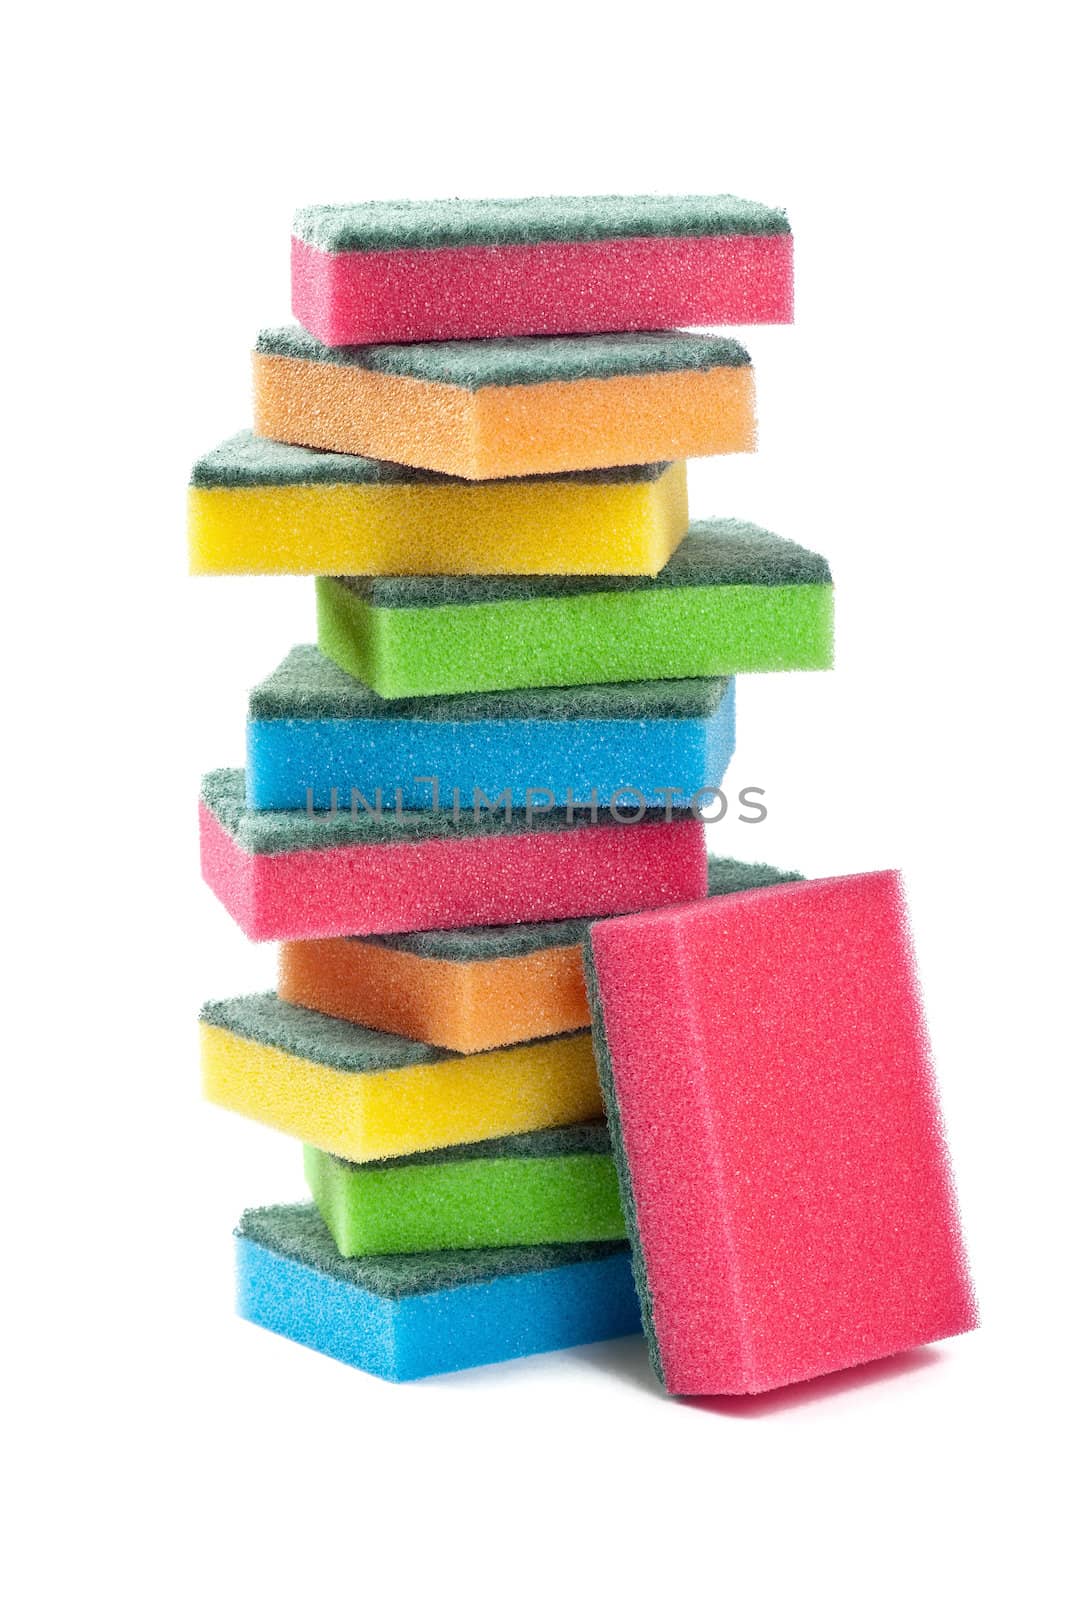 Many Colorfull Sponges Tower on White Background